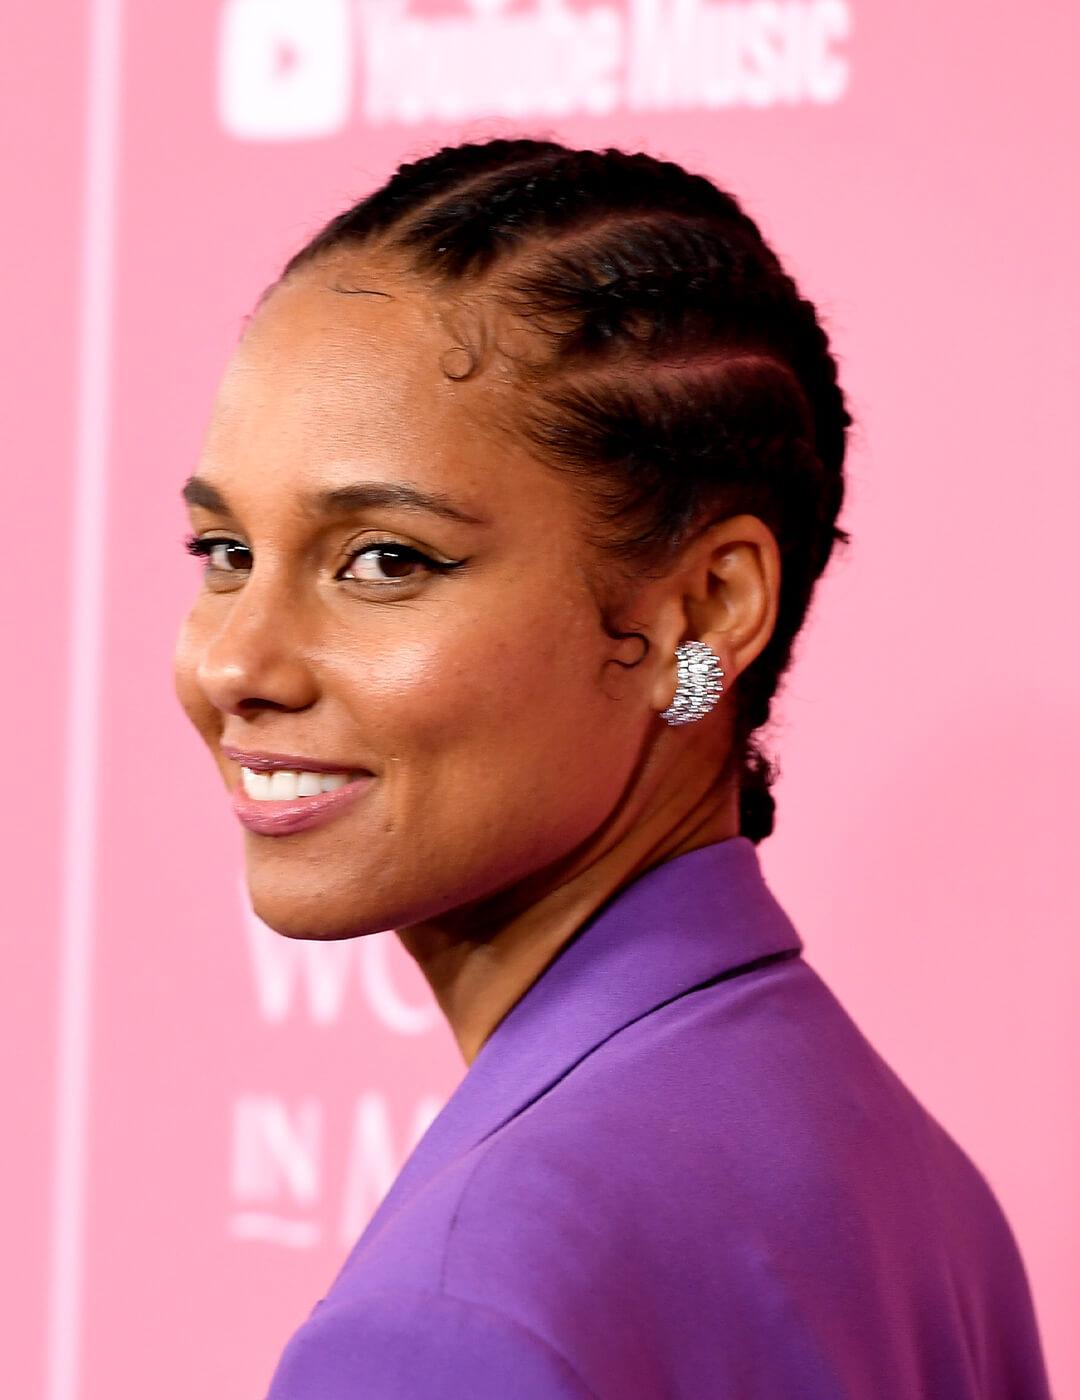 Alicia Keys wearing a cornrows hairstyle and a purple suit